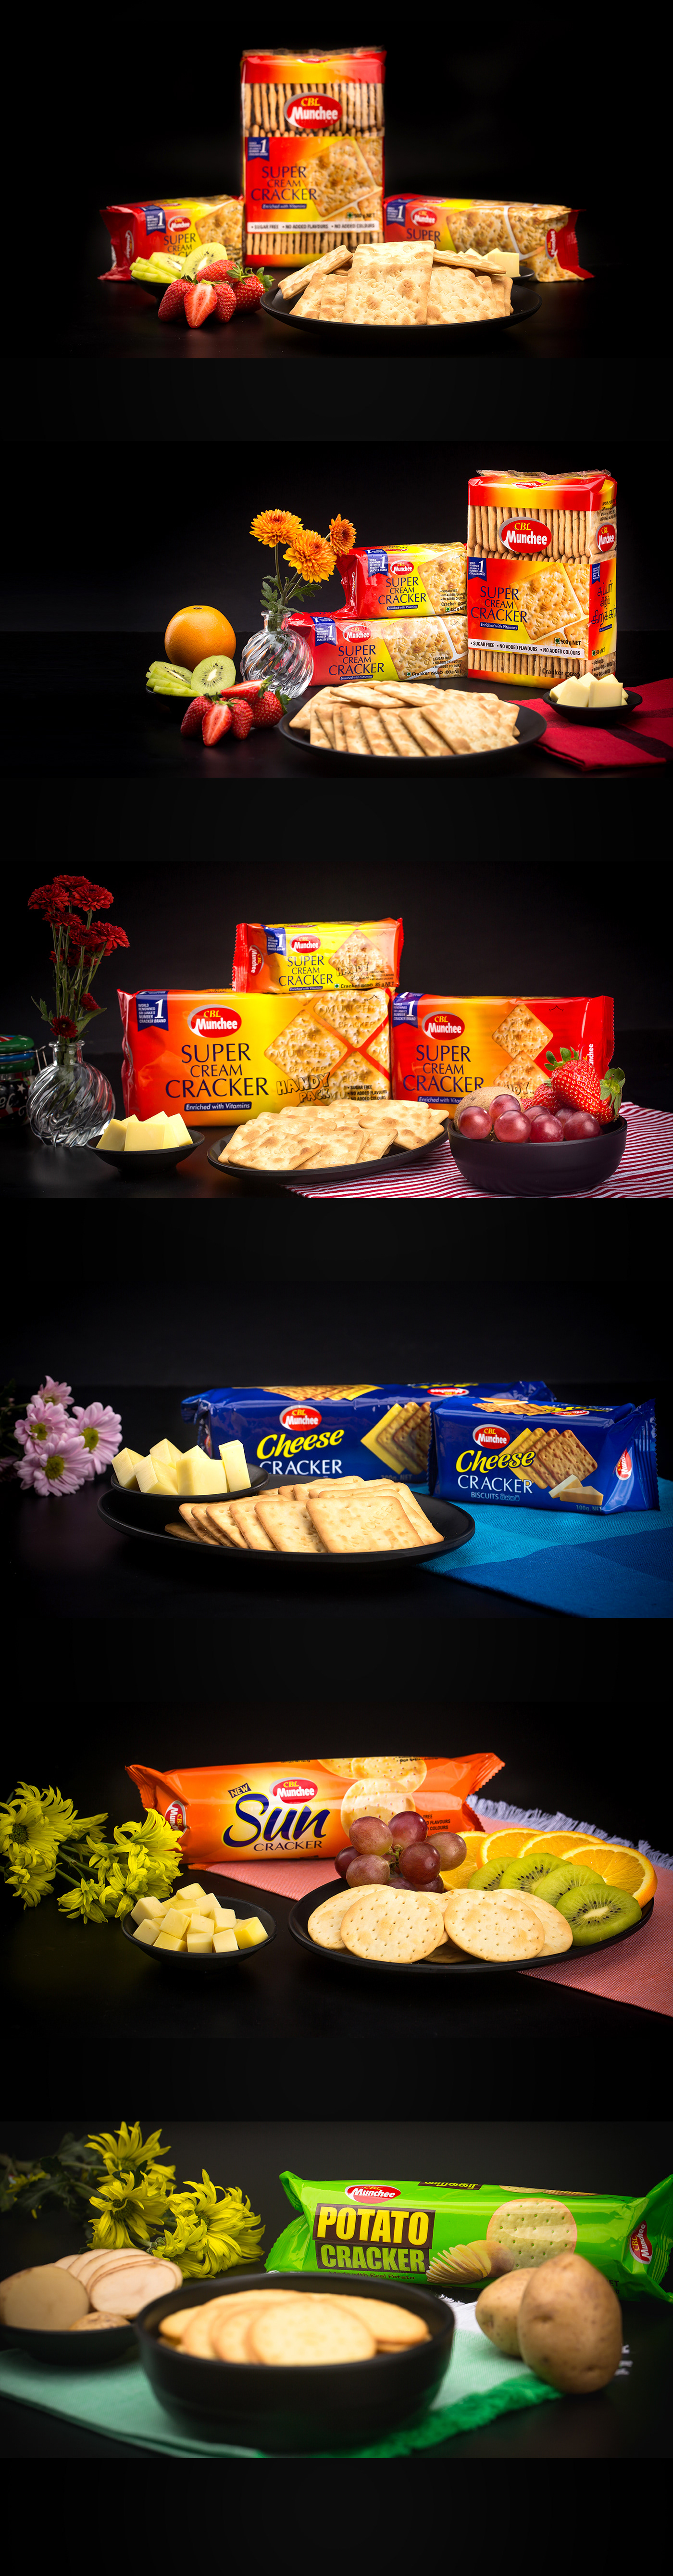 cbl munchee Product Photography creative biscuits Food  Pictorial Studios Website images crackers food styling